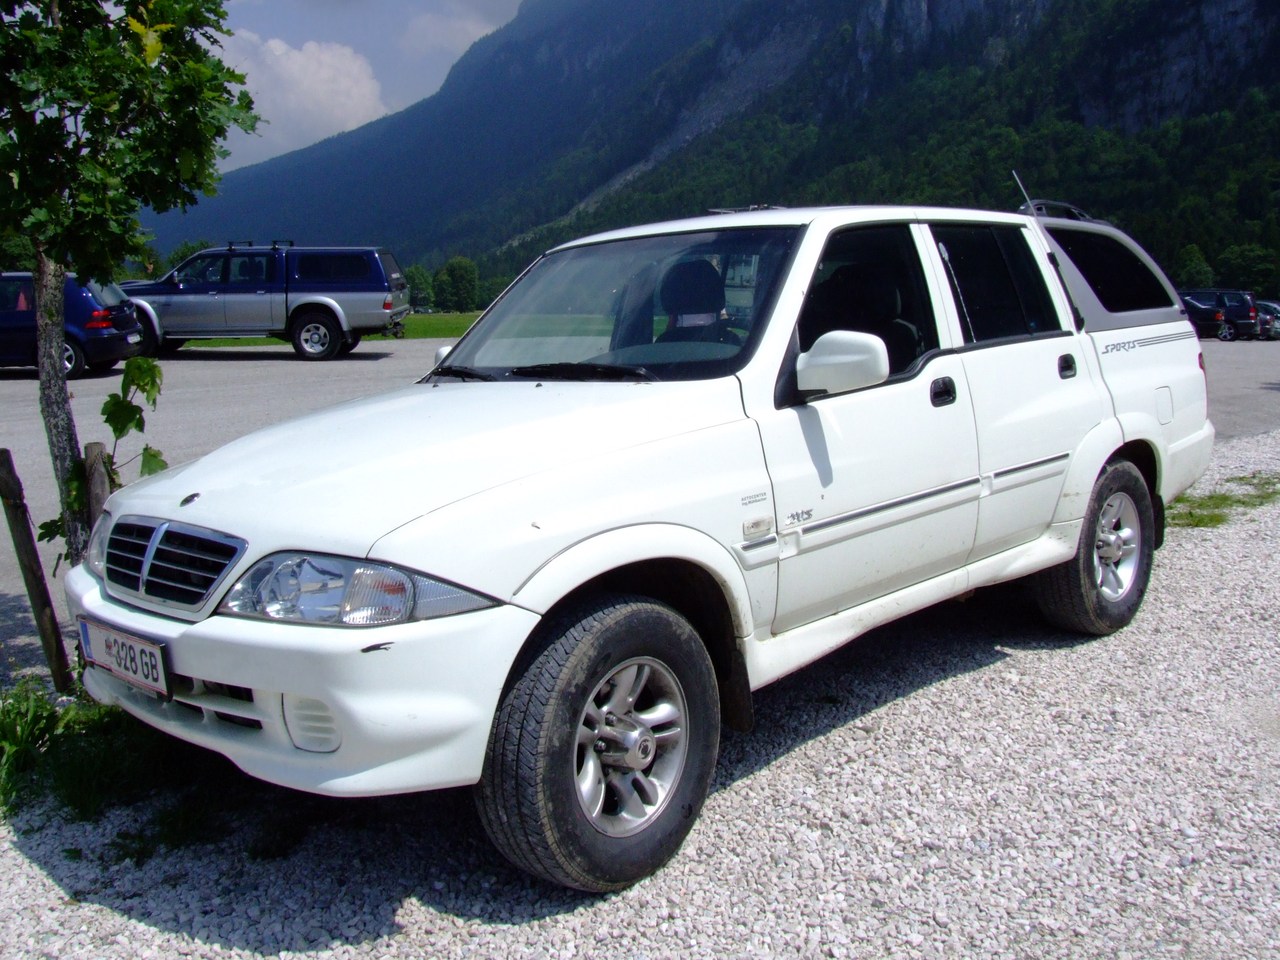 Ssangyong musso sports. Санг енг Муссо. SSANGYONG Musso 1. Санг енг Муссо спорт. SSANGYONG Musso Sport 2007.